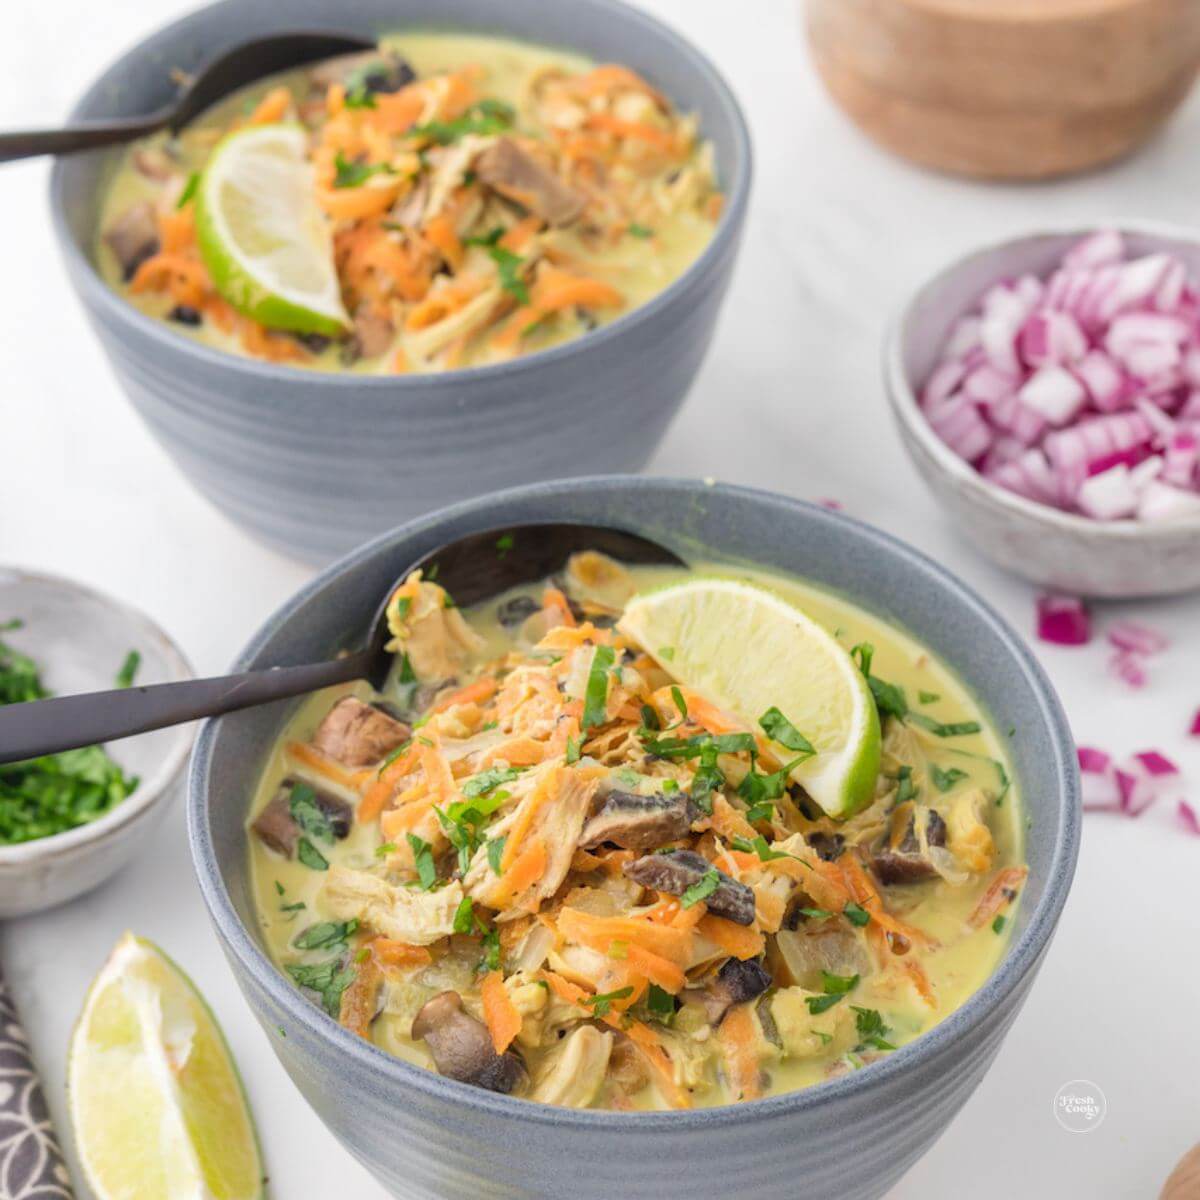 Thai coconut chicken soup in bowls, topped with a wedge of lime and cilantro.